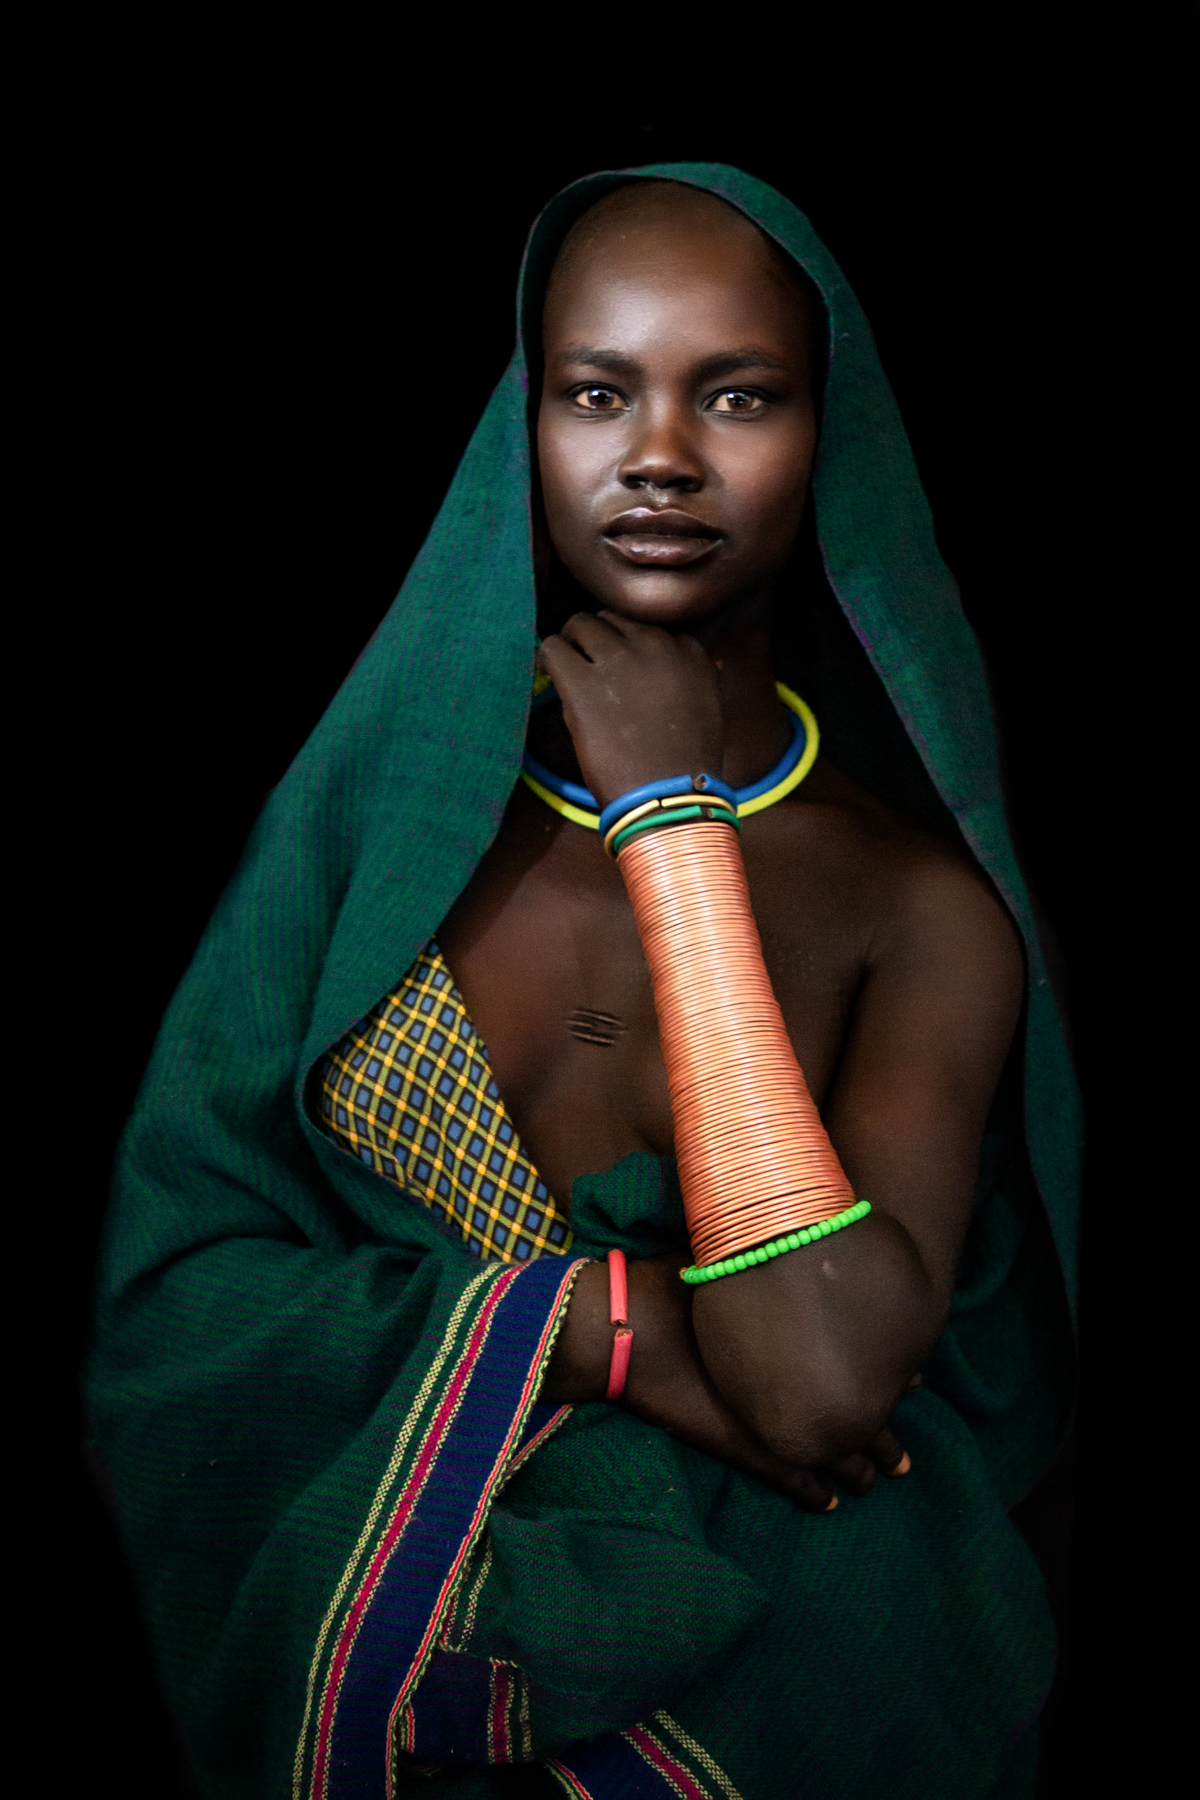 Portrait of a young Suri woman by Inger Vandyke of Wild Images photo tours